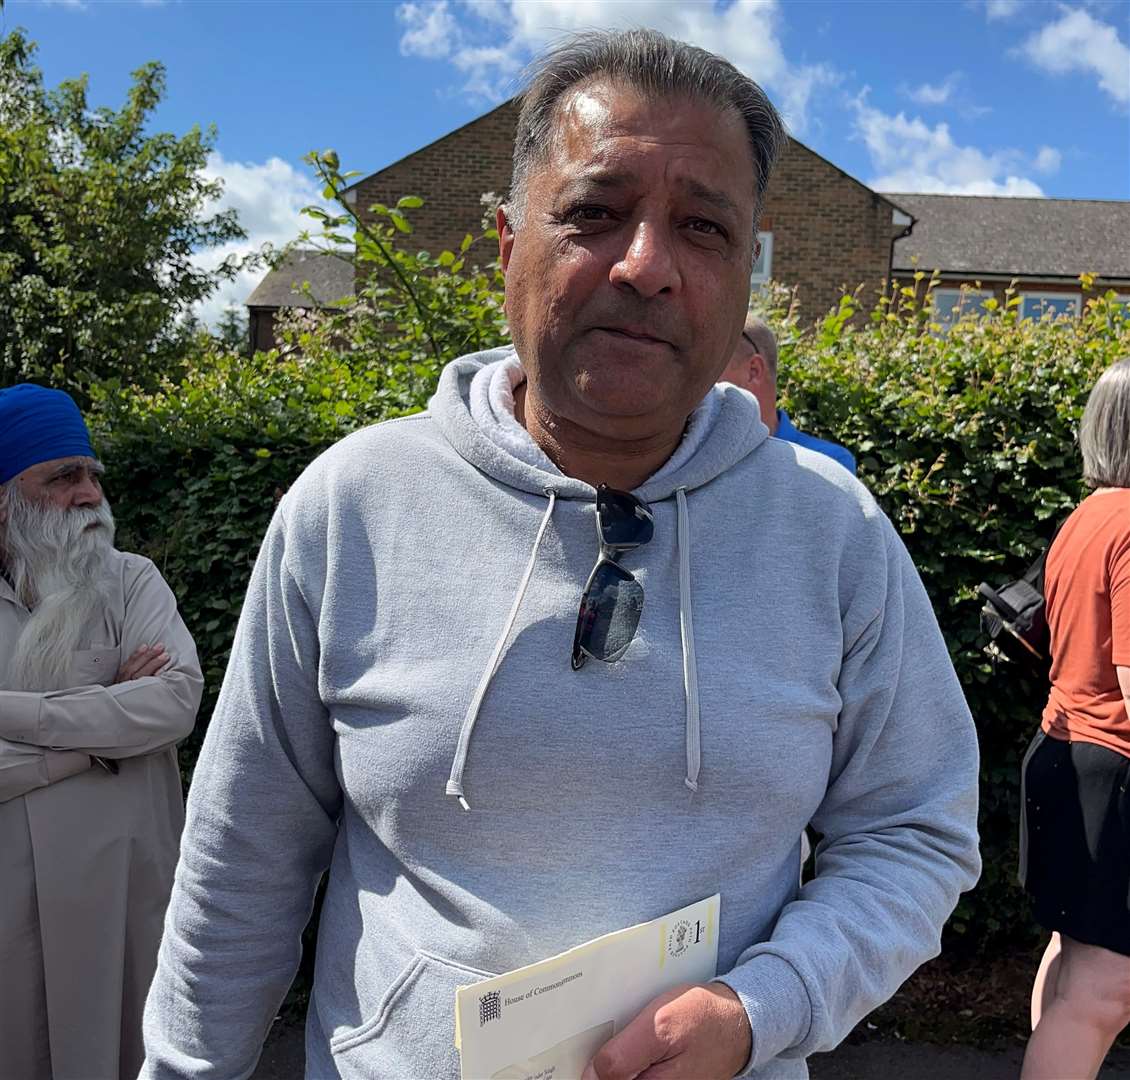 Joe Singh has created a petition and set up a protest against the plans for Edward Moore House